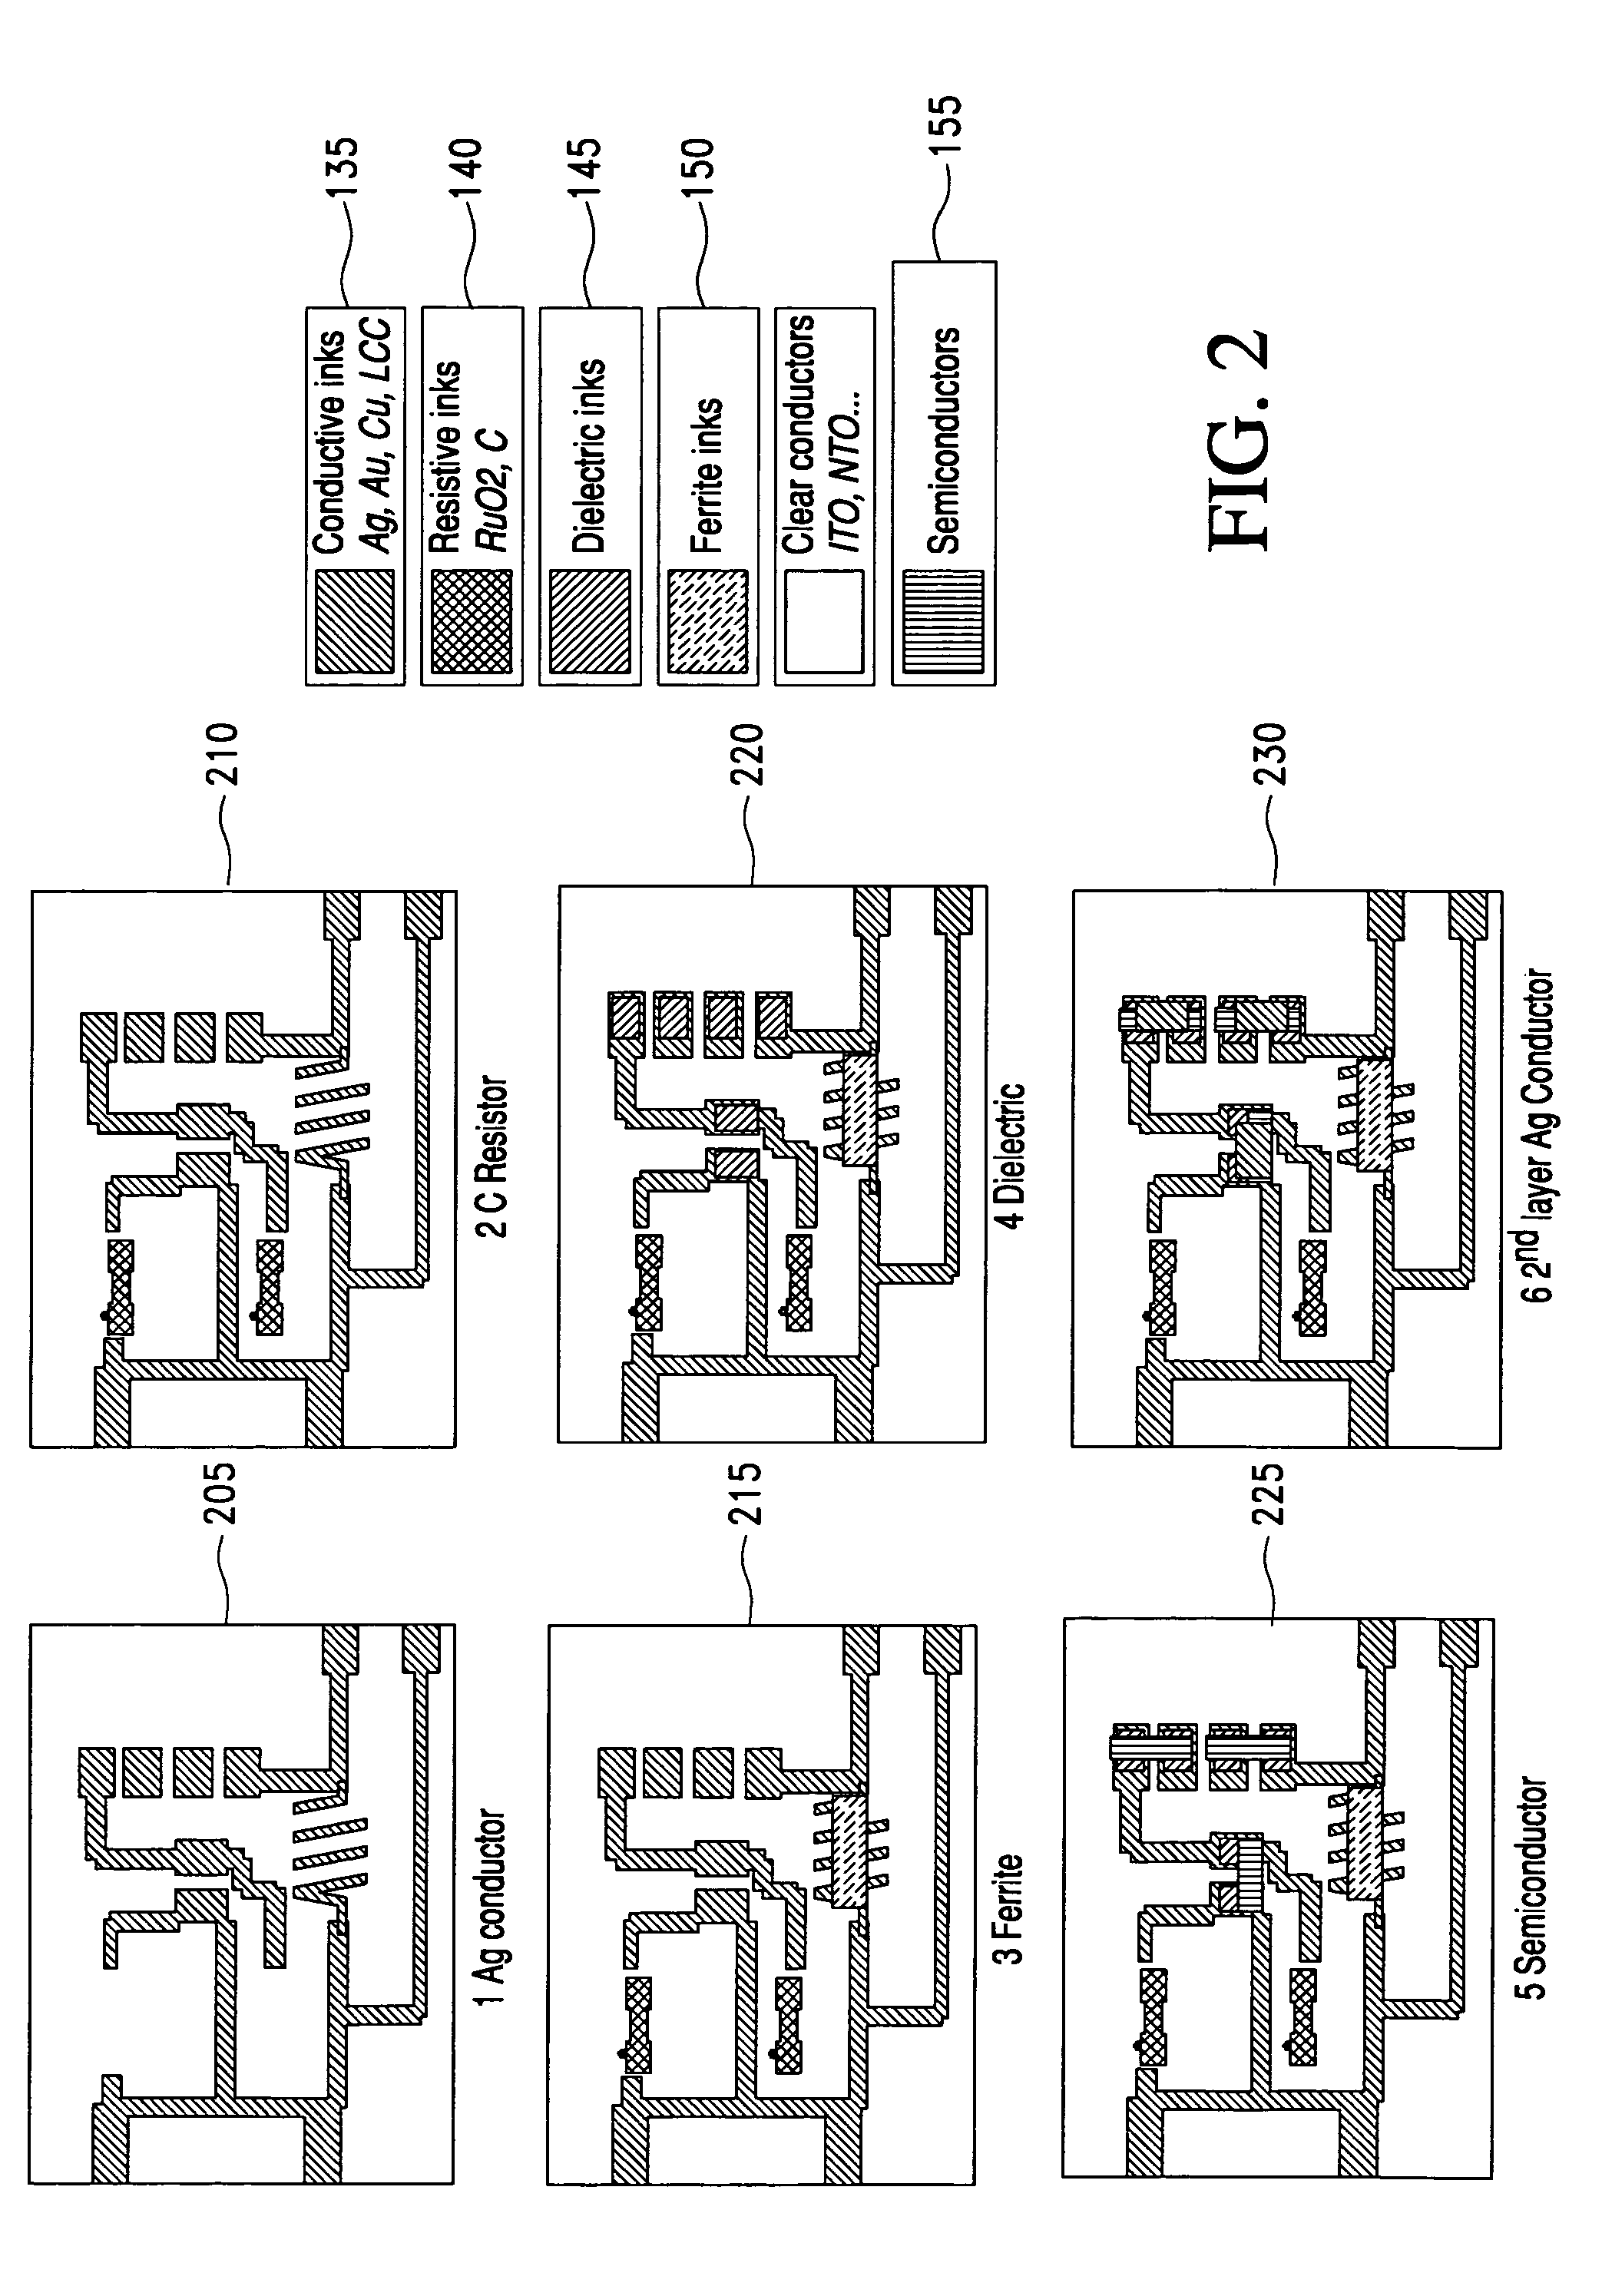 Optimized multi-layer printing of electronics and displays